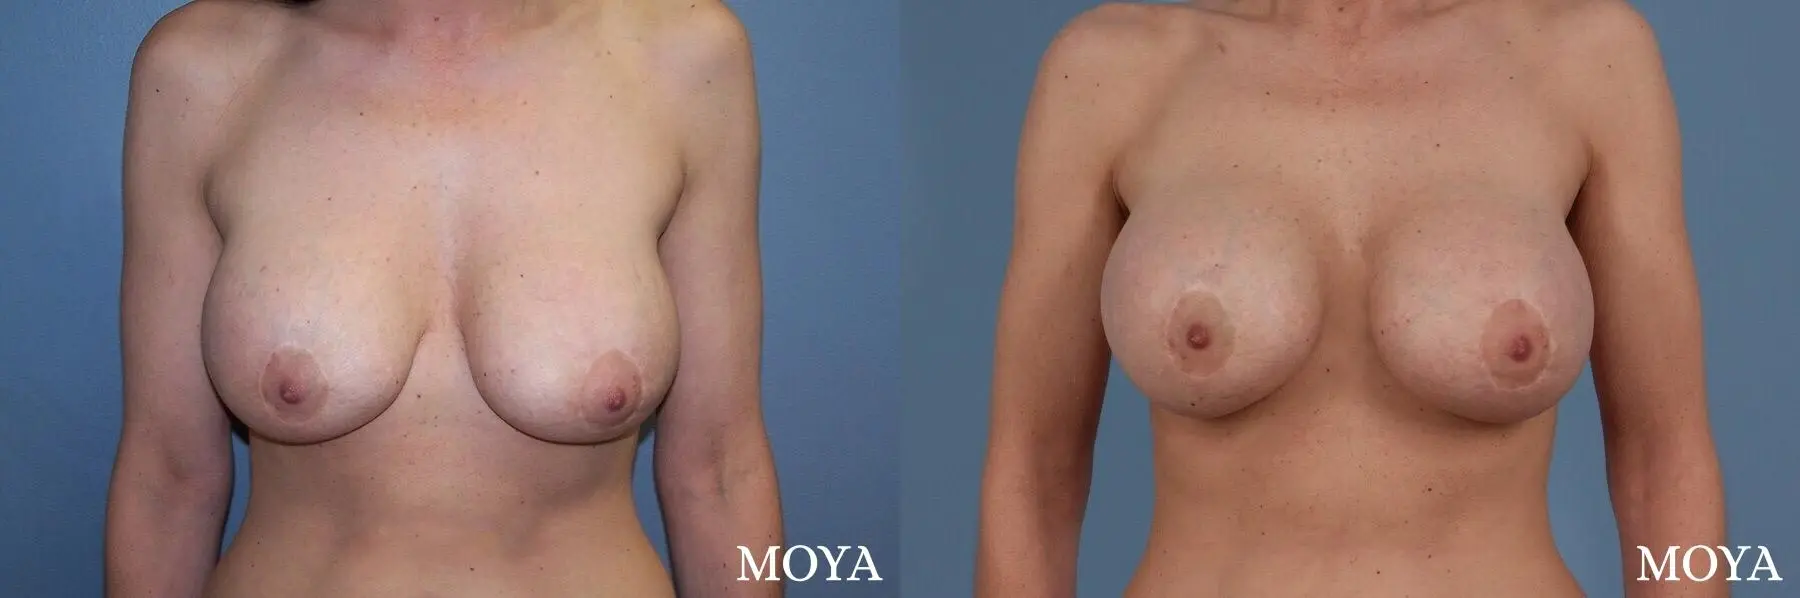 Breast Implant Exchange: Patient 2 - Before and After 1